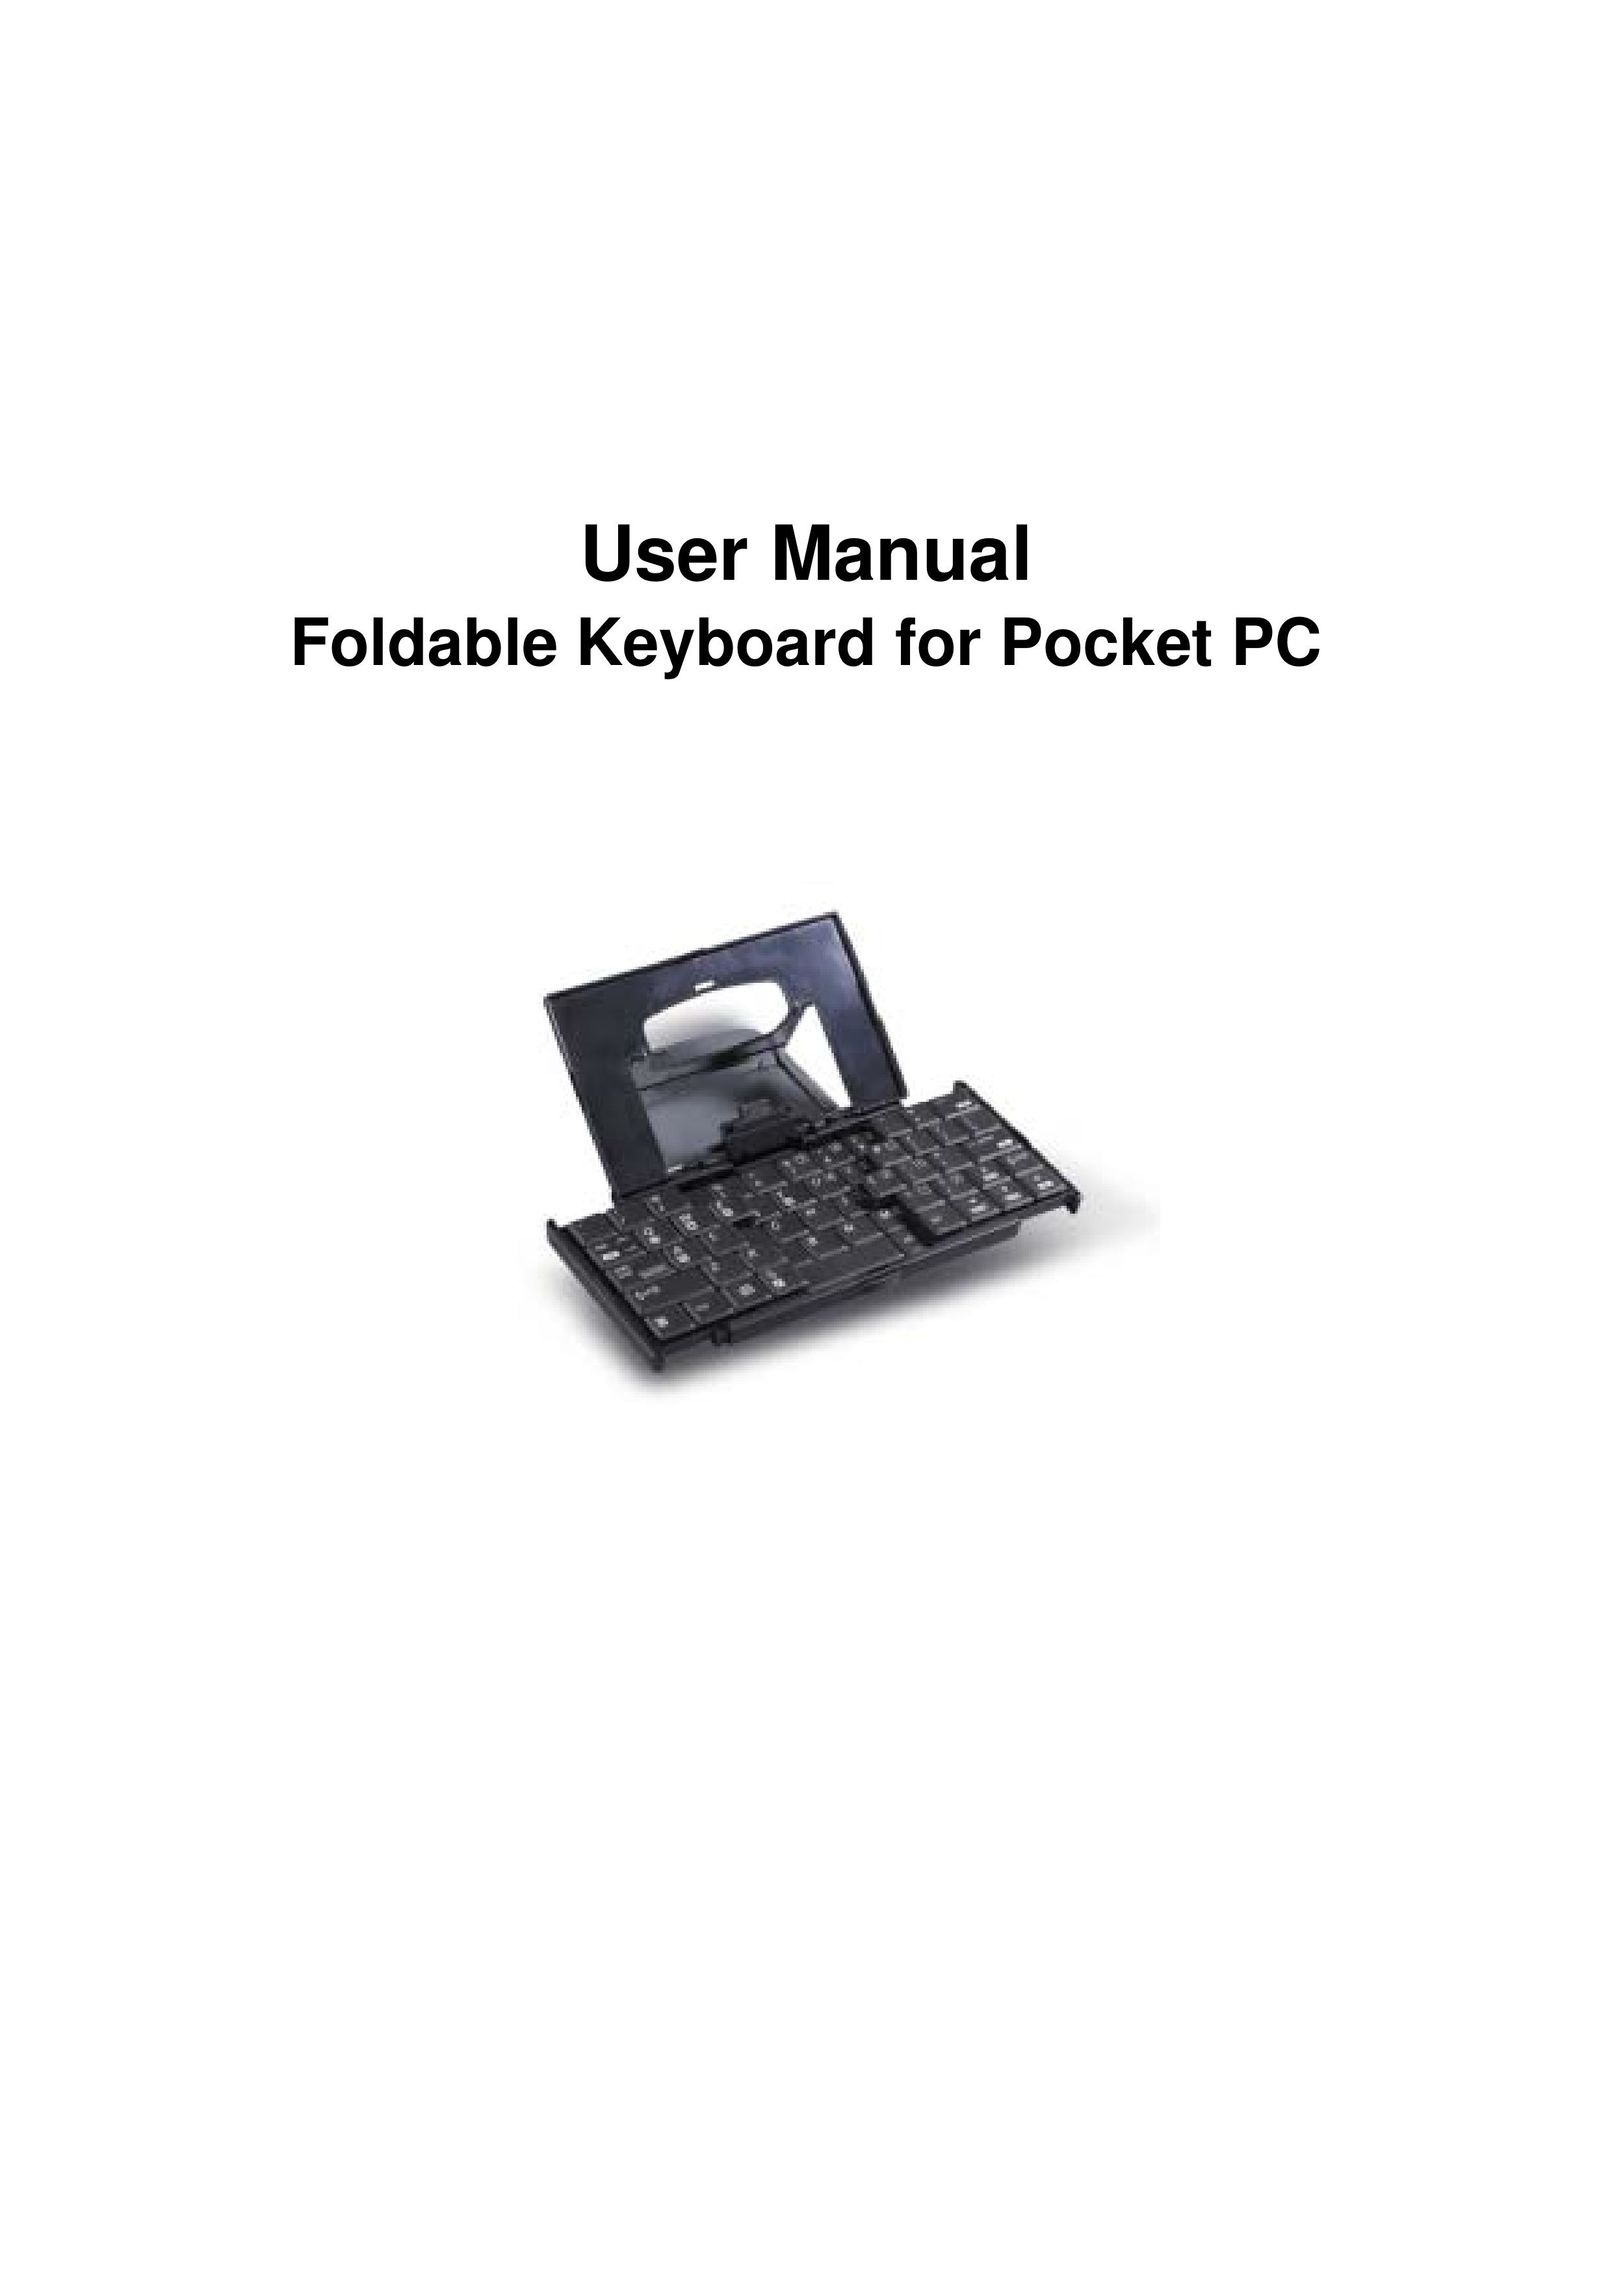 Dell Foldable Keyboard for Pocket PC Mouse User Manual